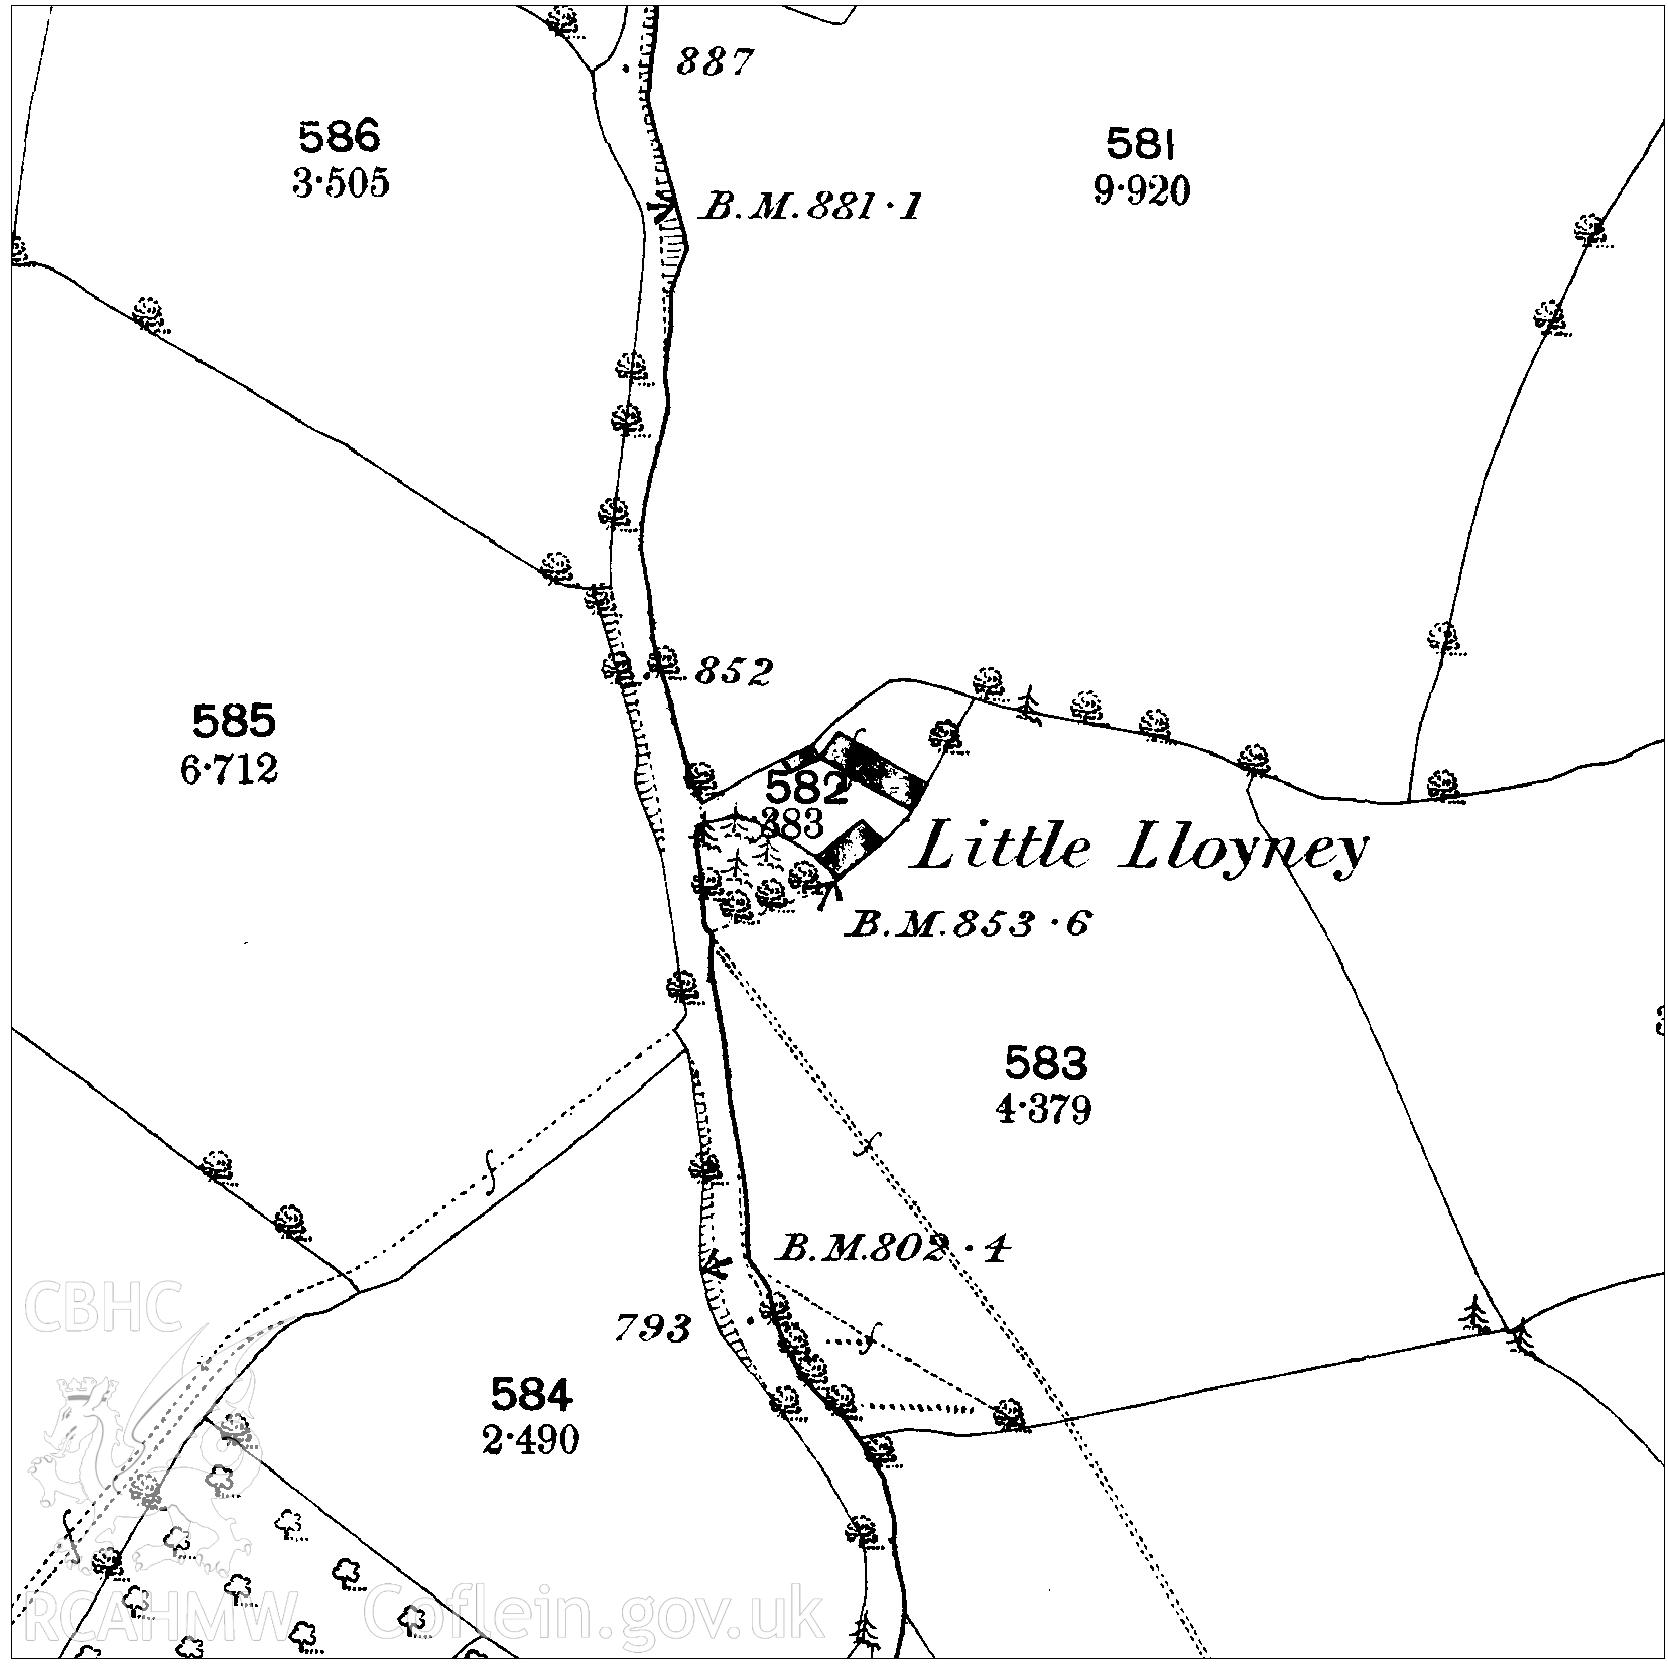 Copy of 1888 map showing location of Little Lloyney relating to CPAT Project 2355: Little Lloyney Farm, Clyro, Powys, 2019. Prepared by Will Logan of Clwyd Powys Archaeological Trust. Project no. 2355. HER event PRN: 140287.